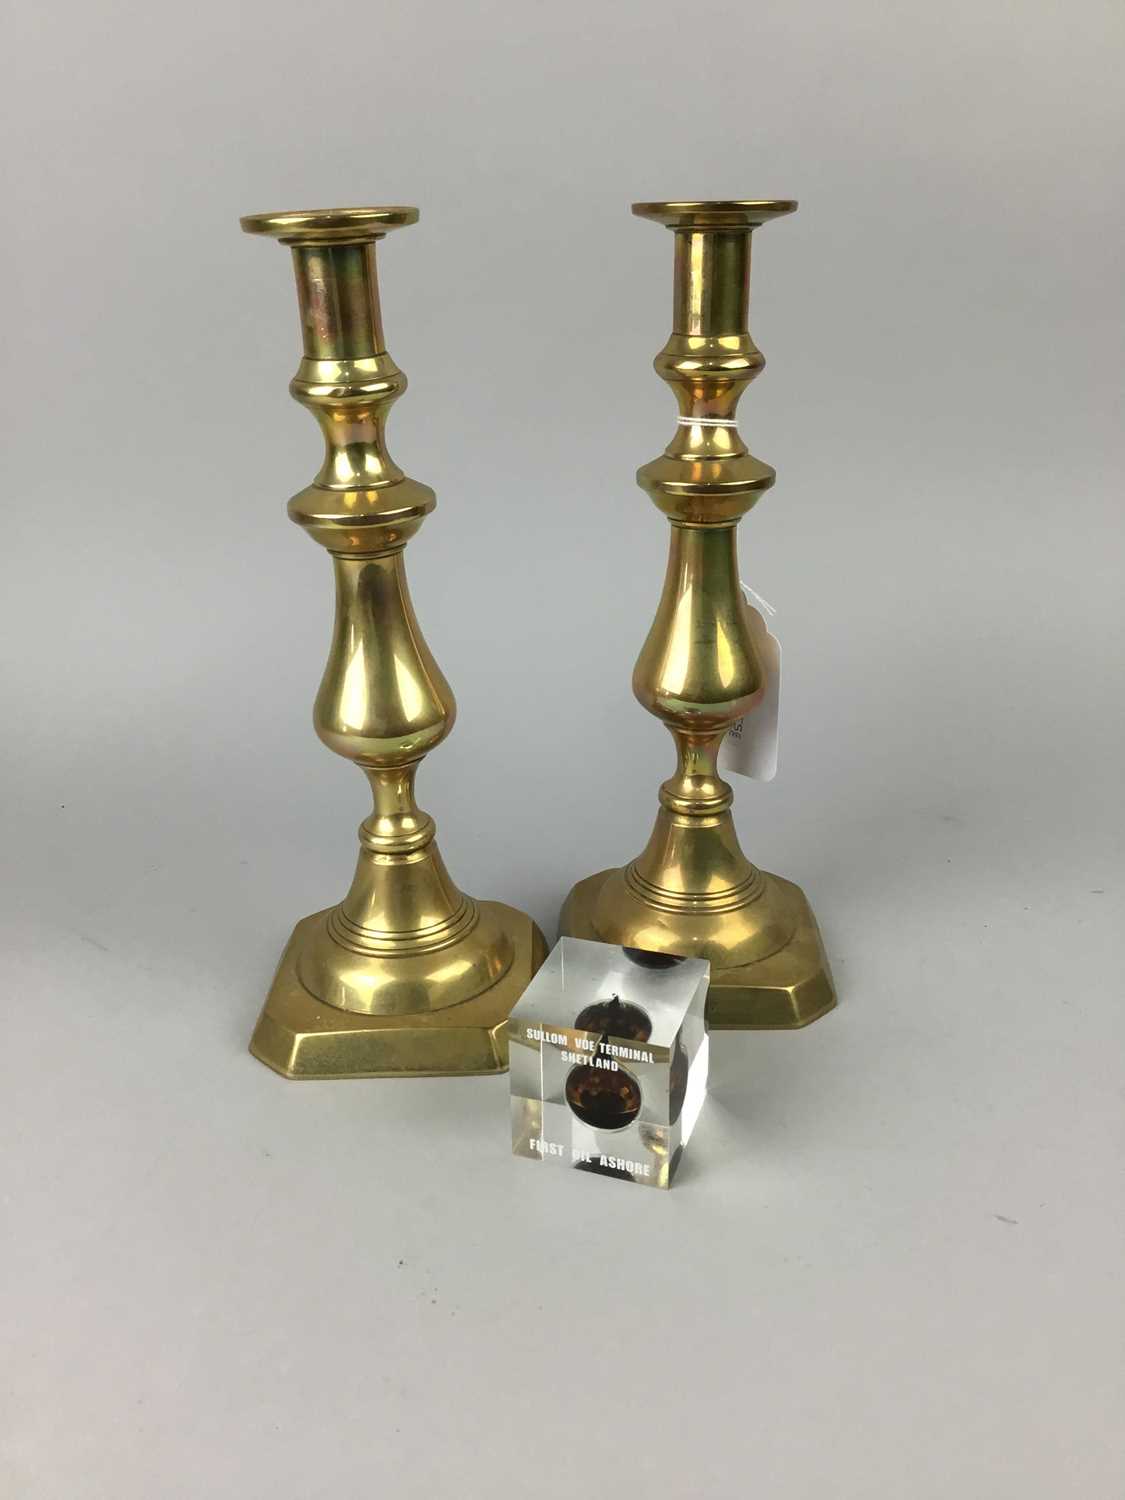 A PAIR OF BRASS CANDLESTICKS ALONG WITH OTHER ITEMS